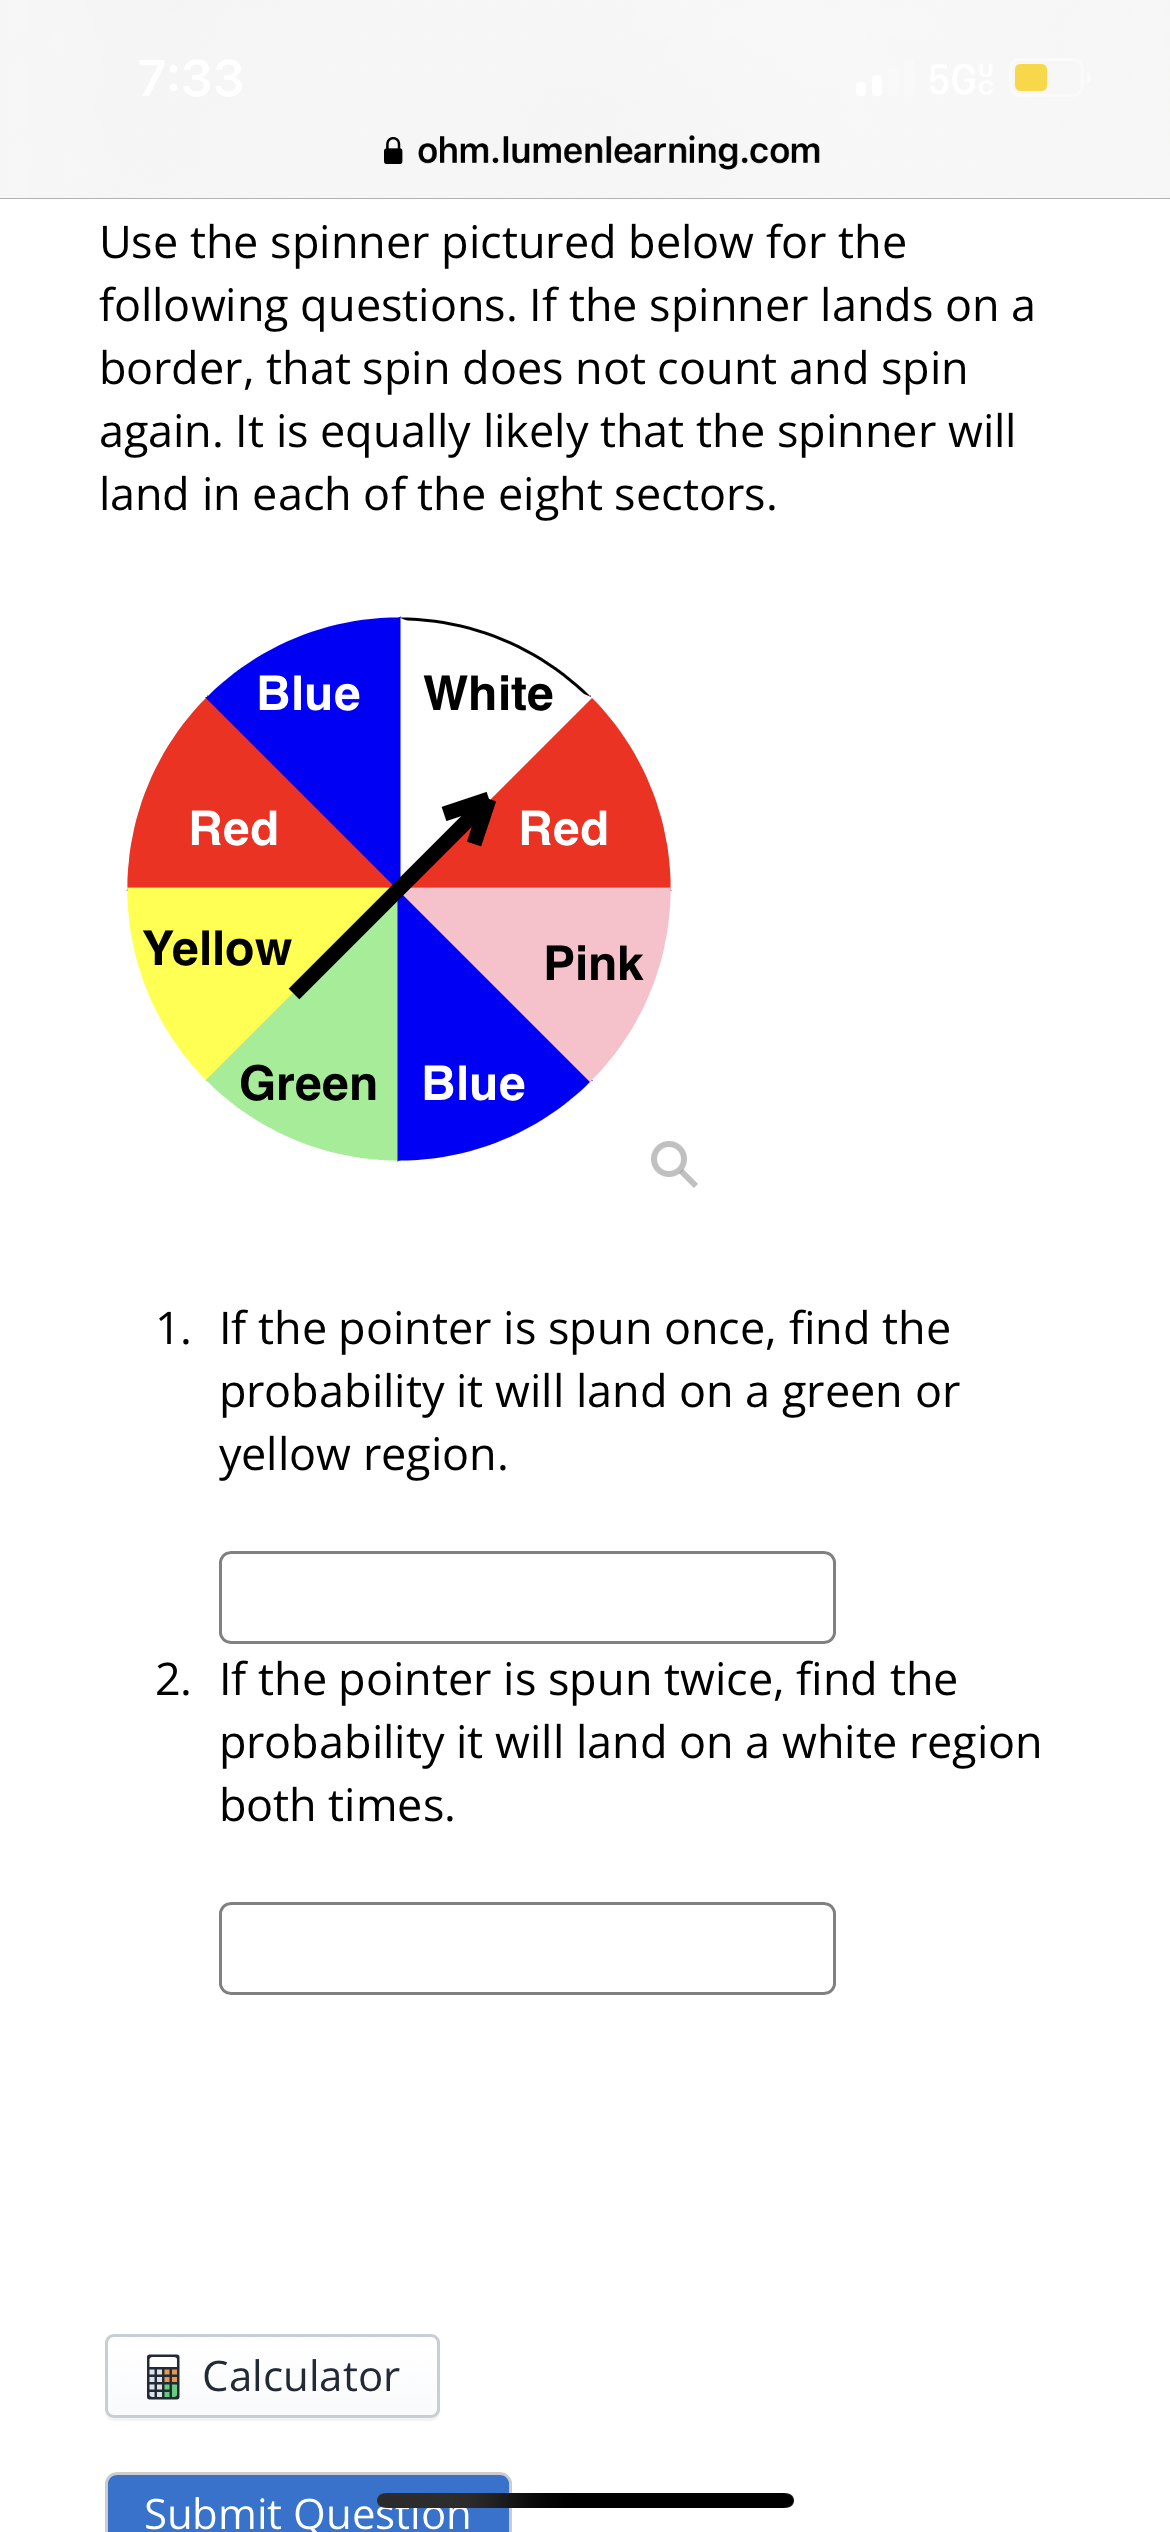 7:33
Blue
Use the spinner pictured below for the
following questions. If the spinner lands on a
border, that spin does not count and spin
again. It is equally likely that the spinner will
land in each of the eight sectors.
Red
Yellow
ohm.lumenlearning.com
White
Green Blue
Calculator
Red
5G
Pink
1. If the pointer is spun once, find the
probability it will land on a green or
yellow region.
Submit Question
2. If the pointer is spun twice, find the
probability it will land on a white region
both times.